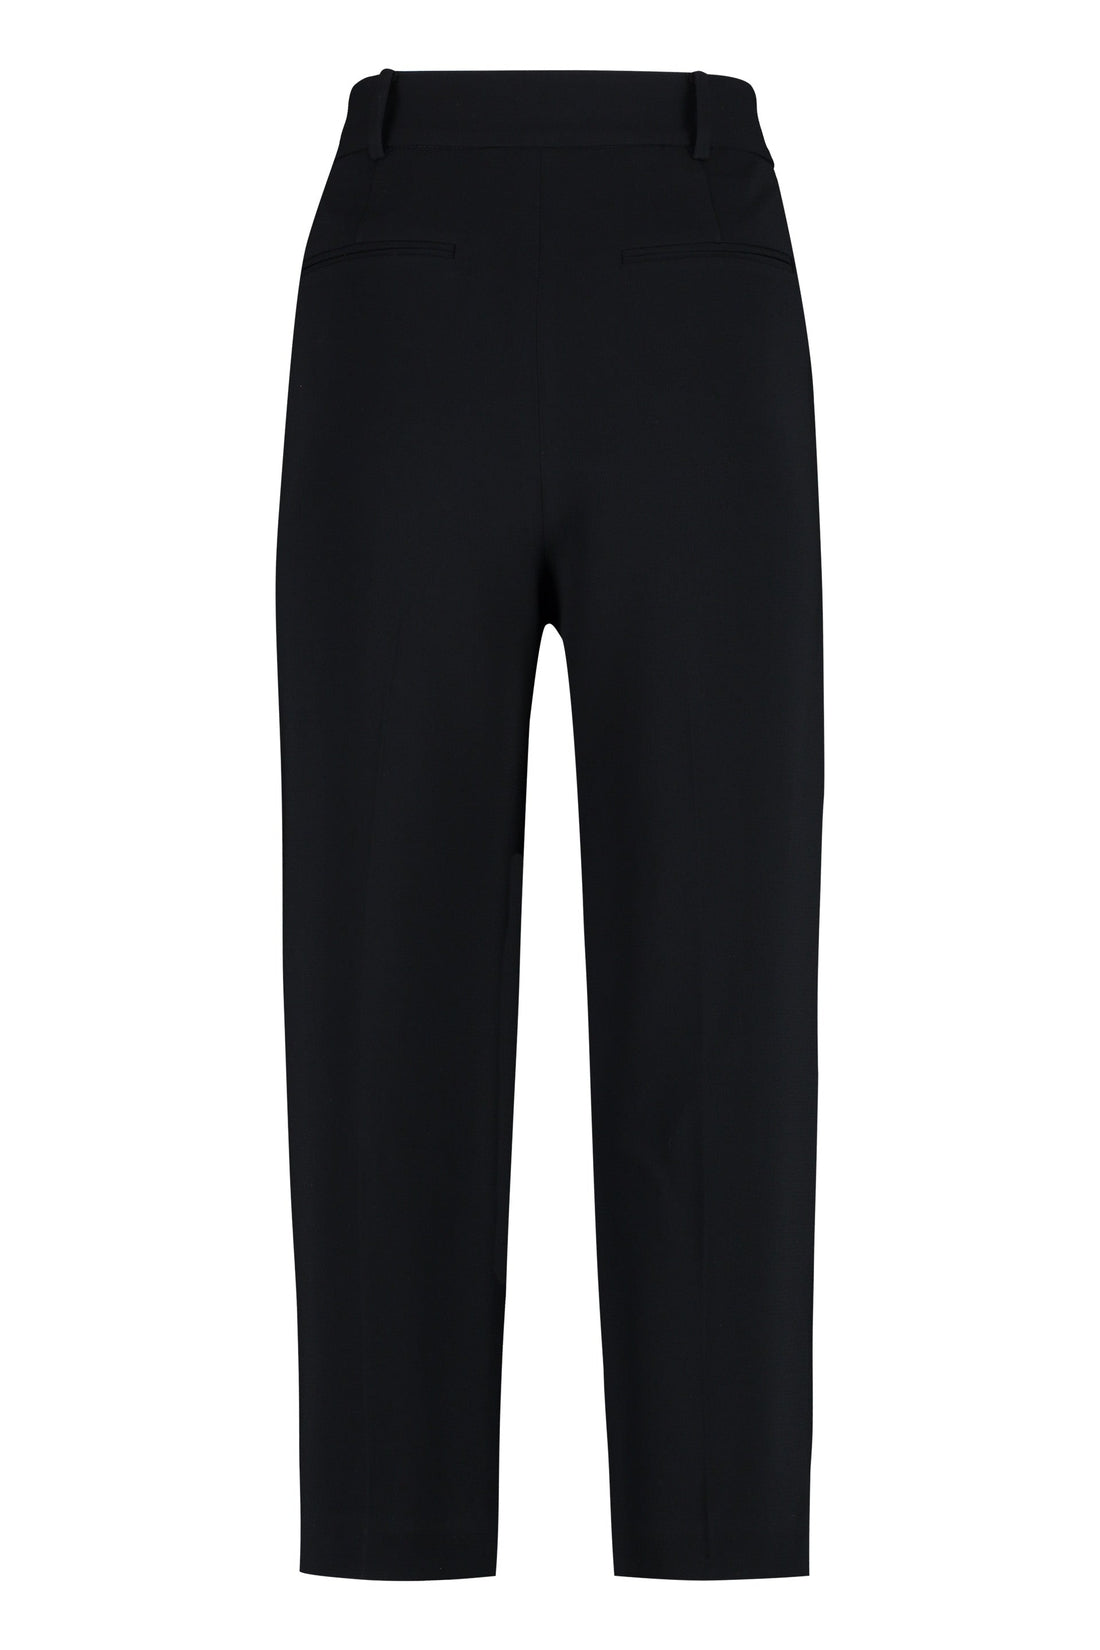 MICHAEL MICHAEL KORS-OUTLET-SALE-High-waisted cropped trousers-ARCHIVIST